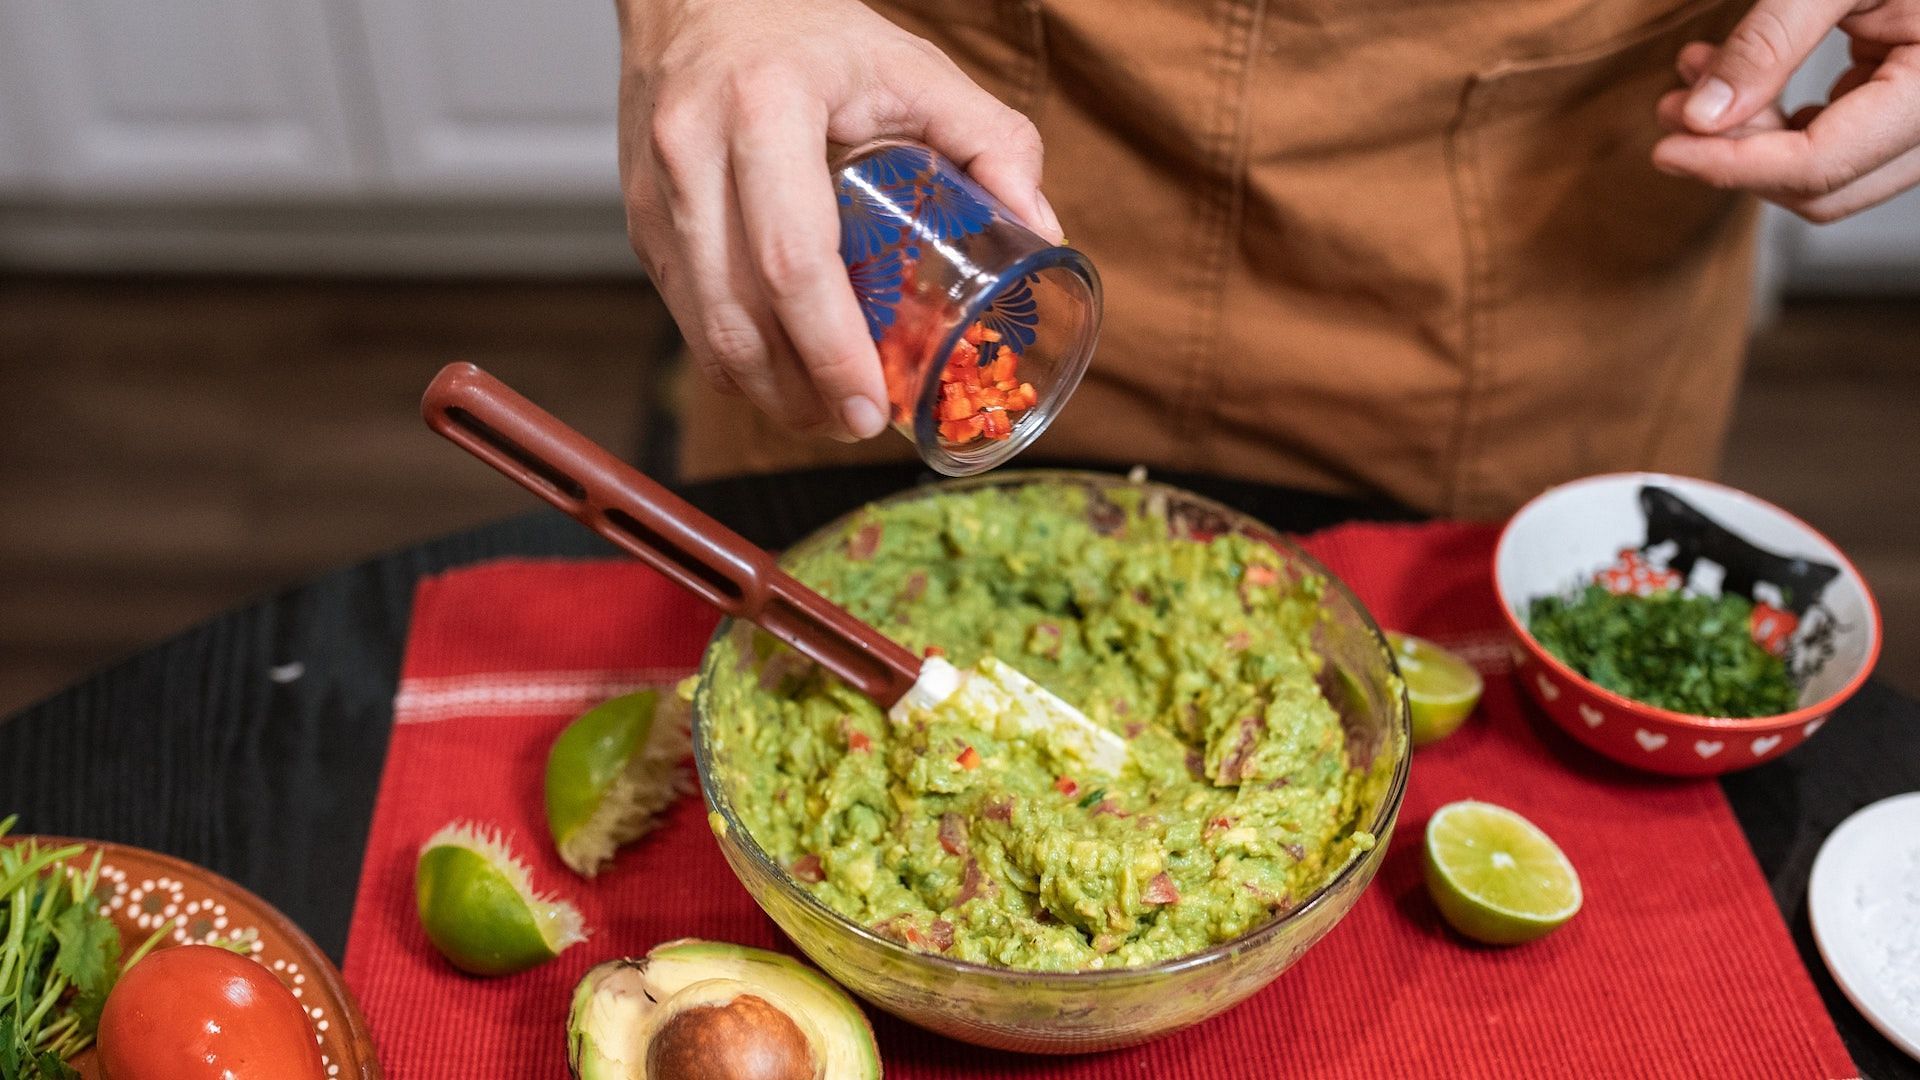 One avocado makes for lots of guac. Image via Pexels/RODNAE Productions